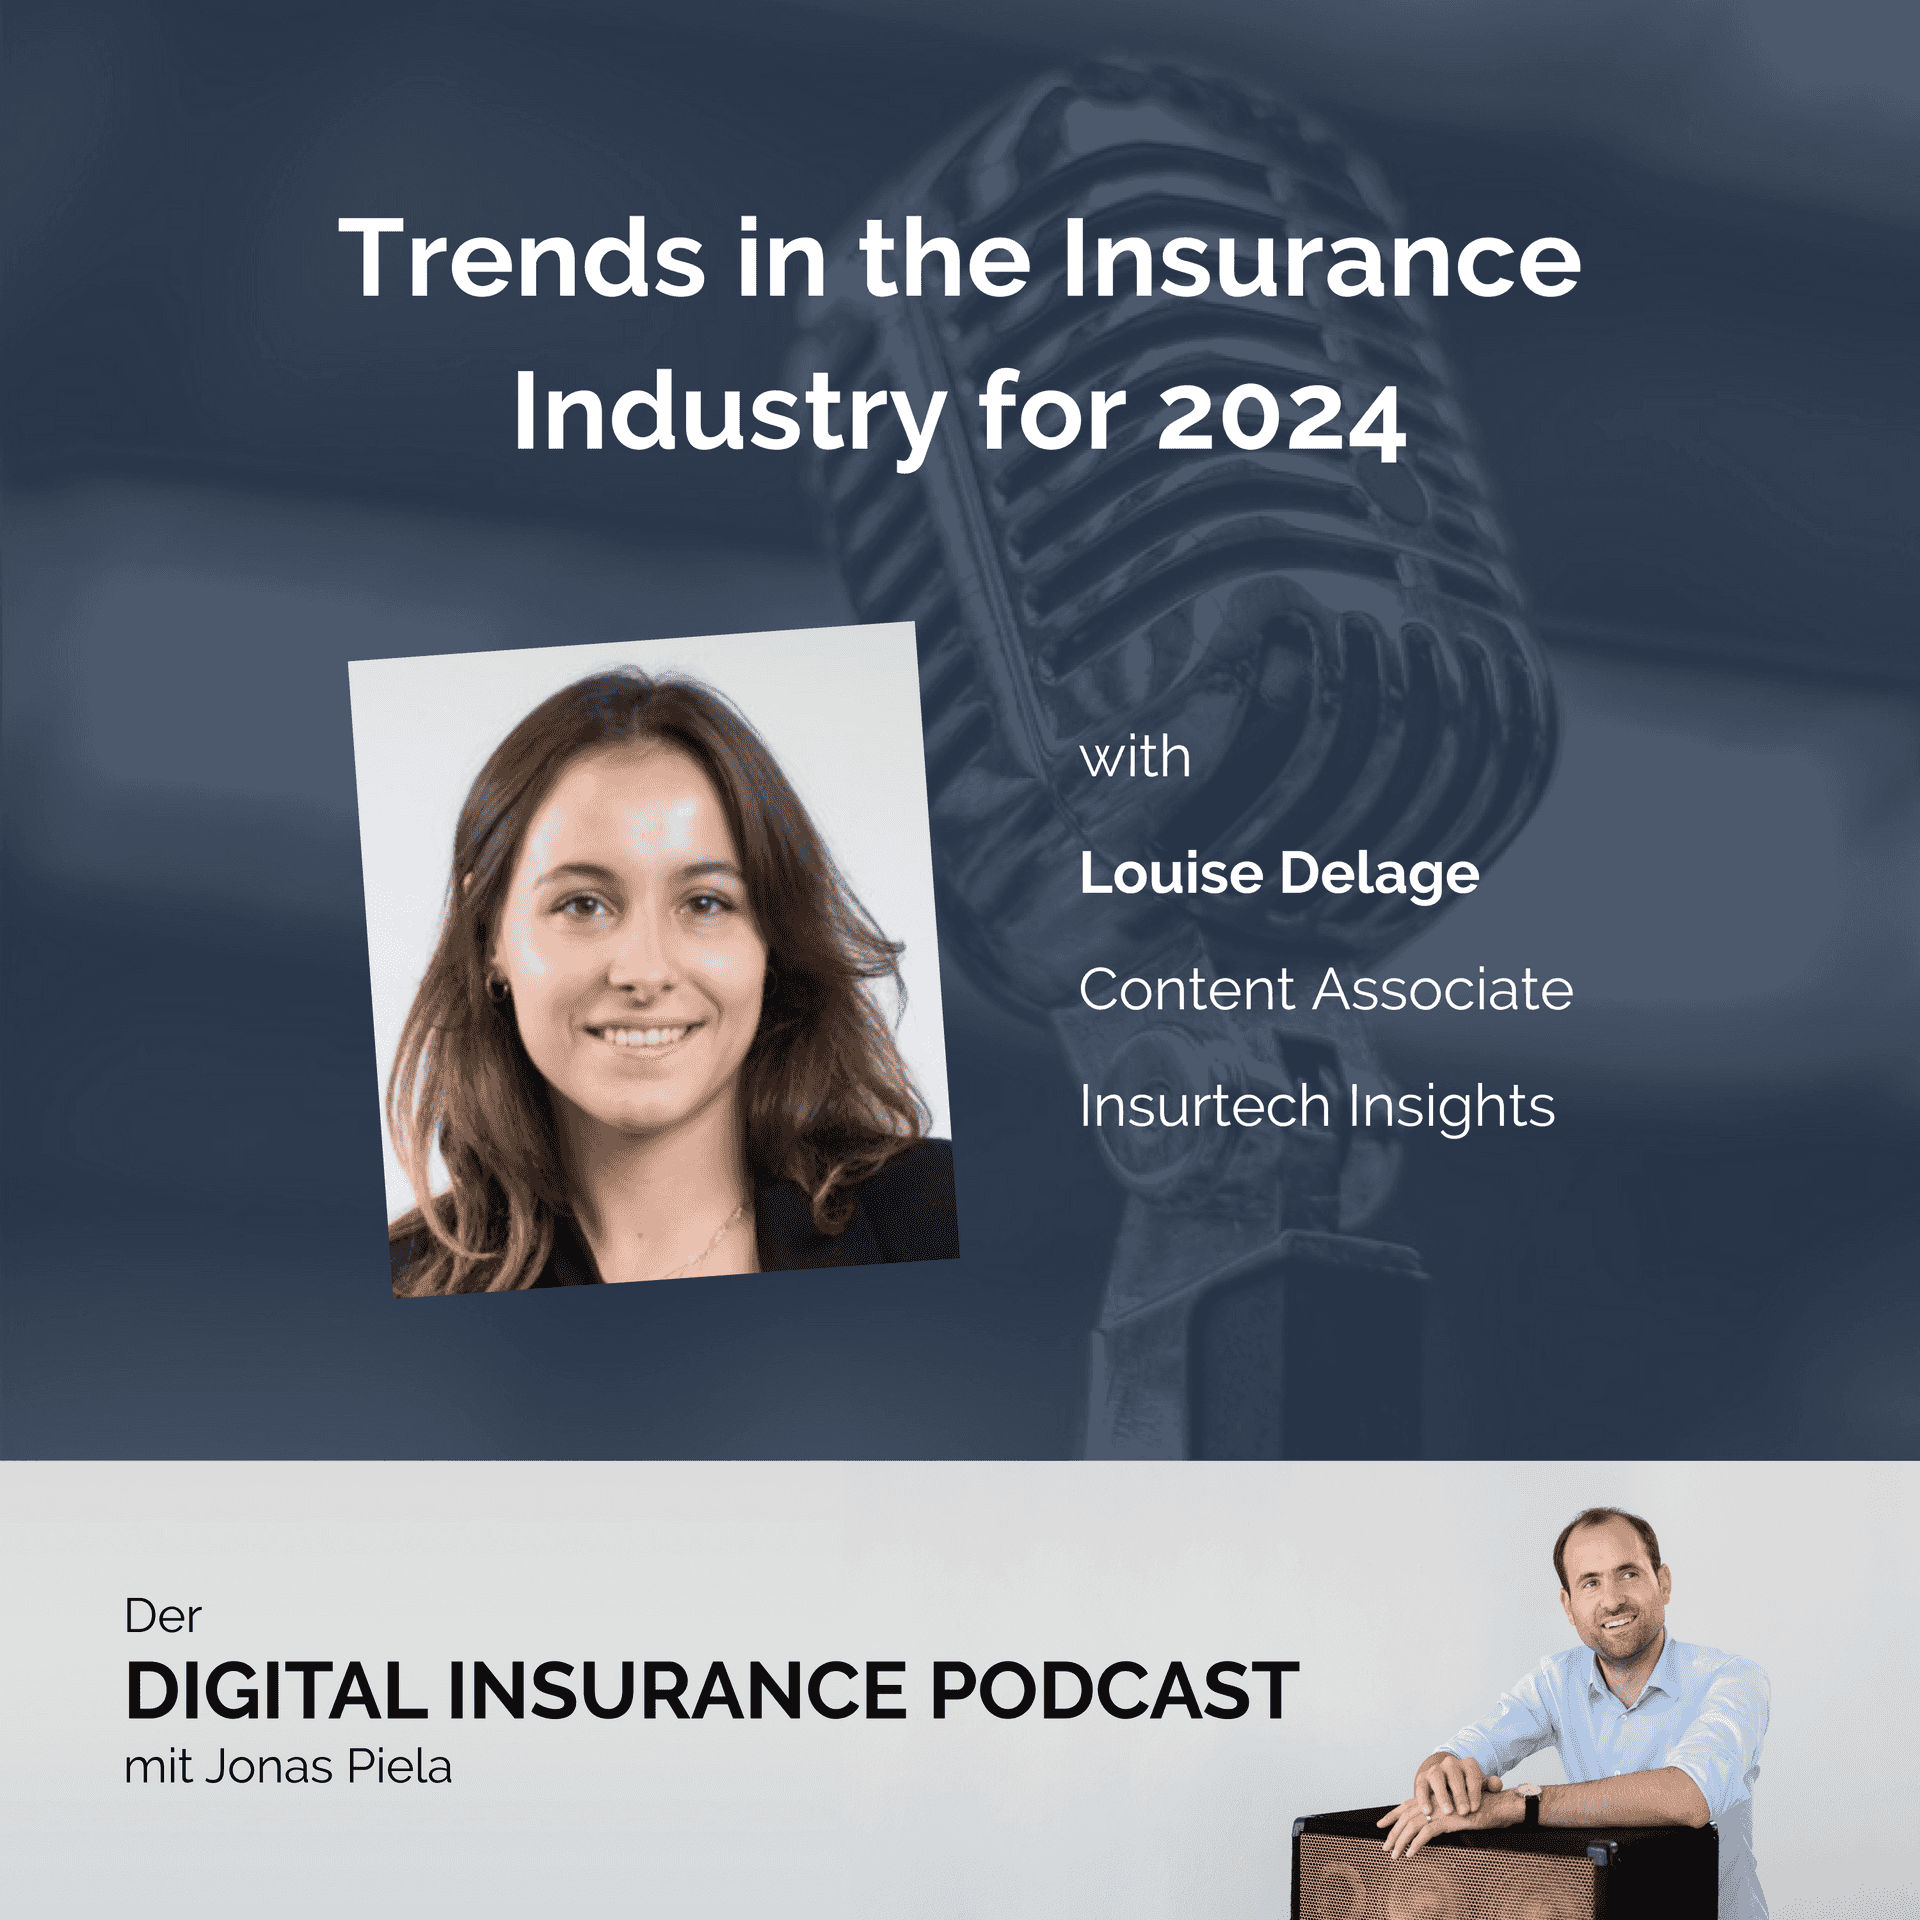 Trends in the Insurance Industry for 2024